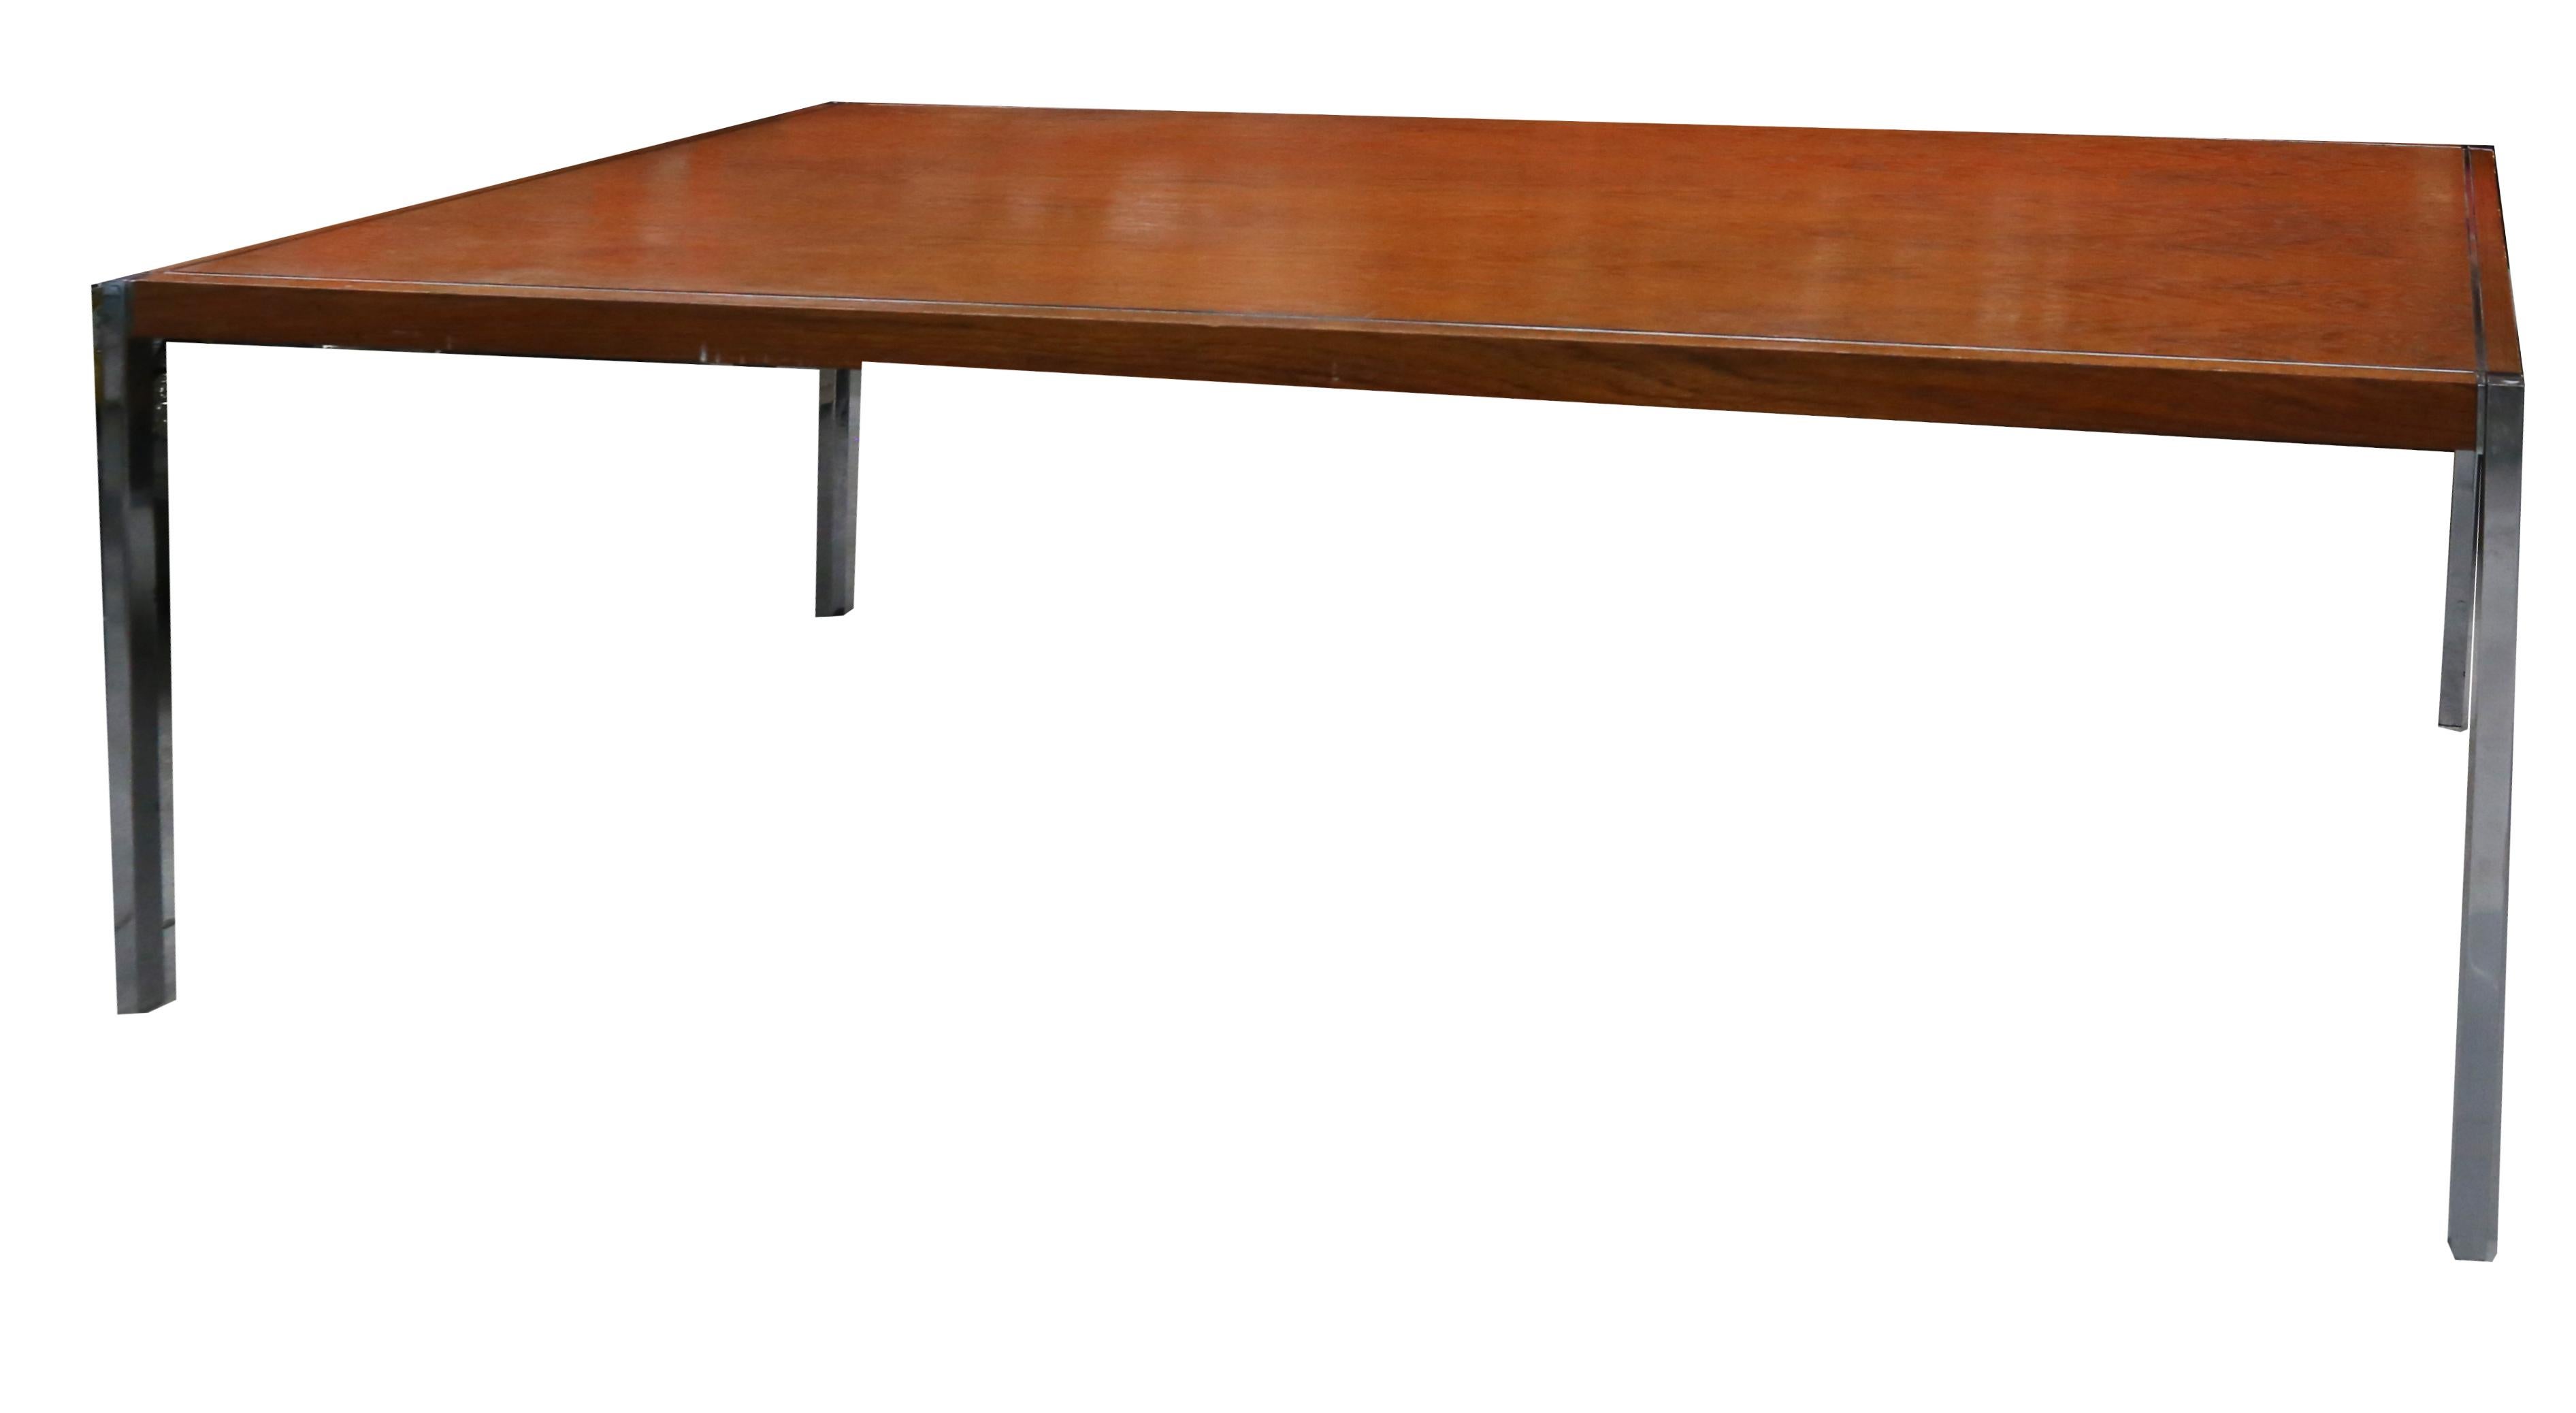 Richard Schultz dining table/ desk with rosewood top and polished stainless steel legs by Knoll.
The table has inlaid stainless detail along edges.